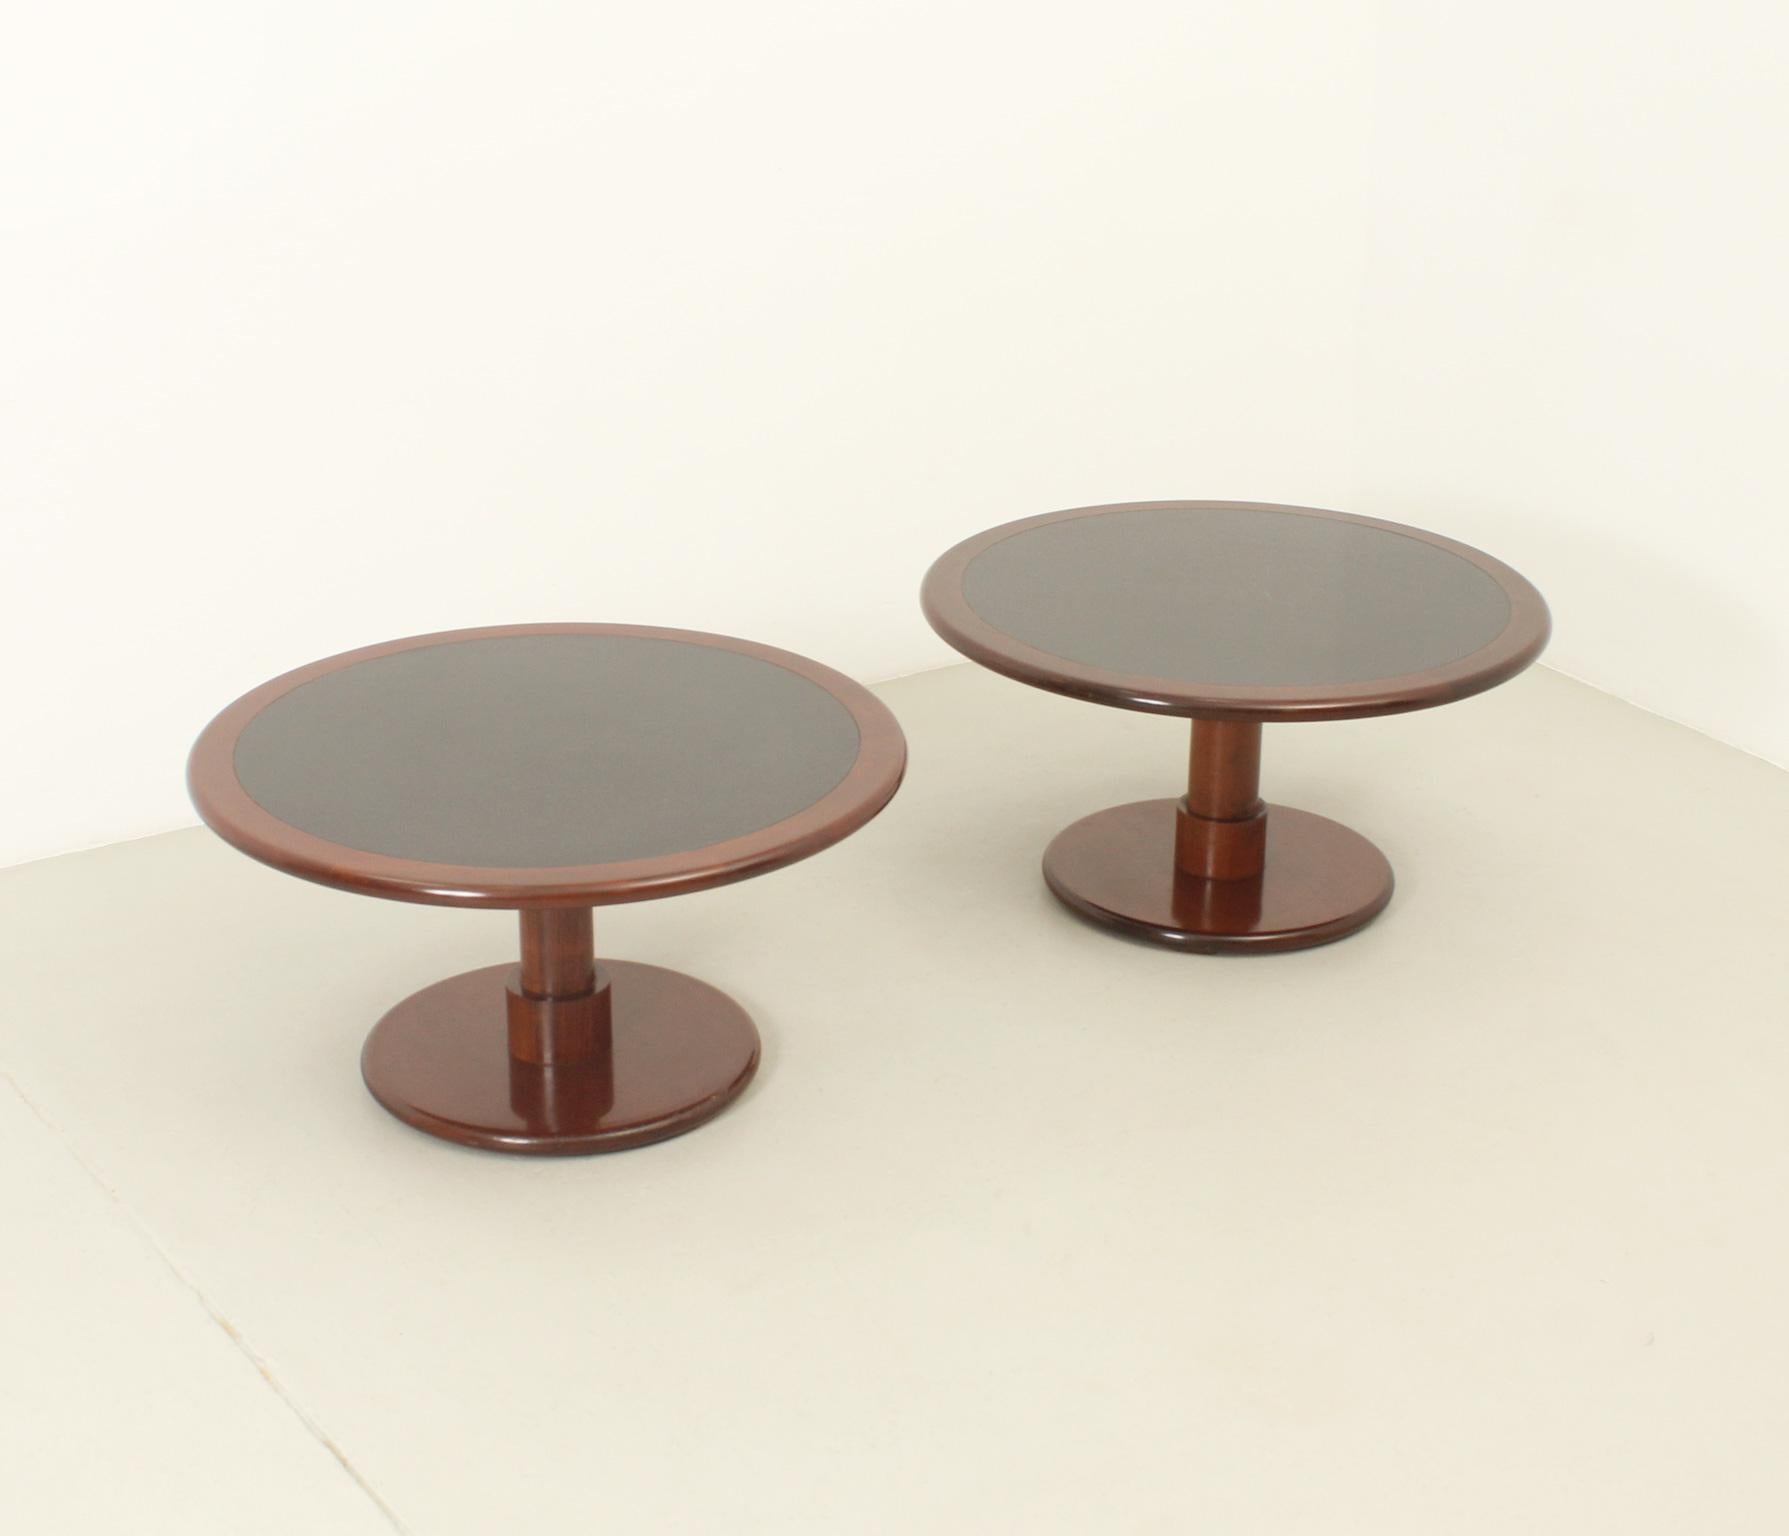 Pair of Reno coffee or side tables designed in 1961 by Spanish architects Federico Correa and Alfonso Milá for the Reno restaurant in Barcelona and produced by Gres. Solid ukola wood and top with center in black laminate. 